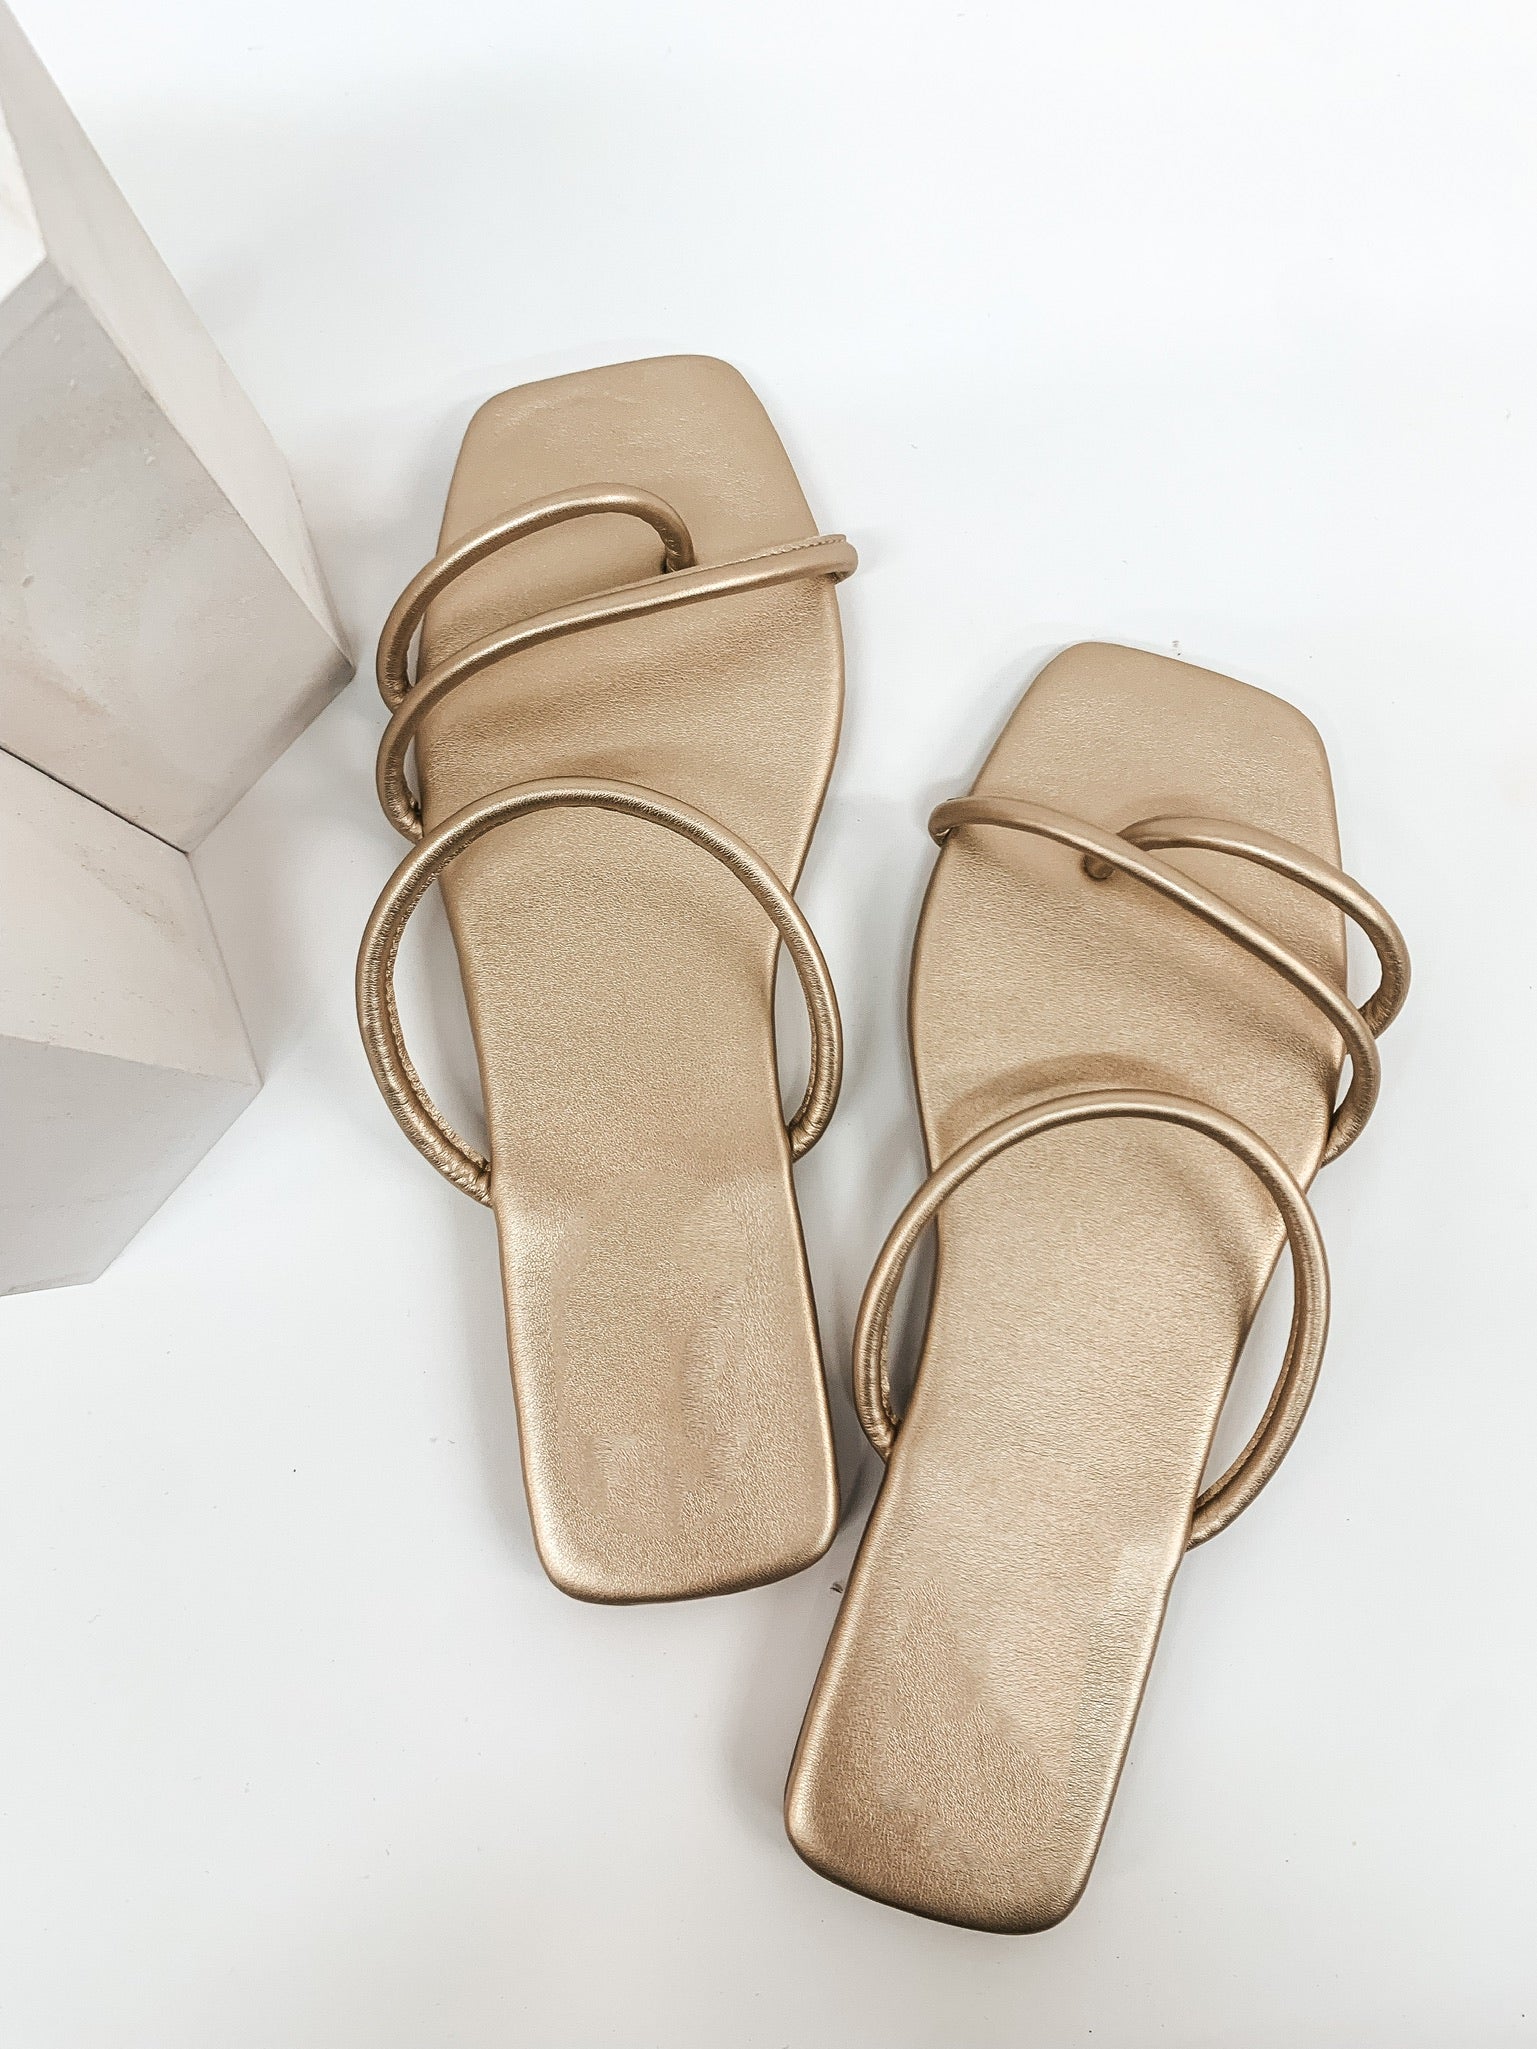 Strut Sis Strappy Square Toe Flat Sandals in Champagne - Giddy Up Glamour Boutique